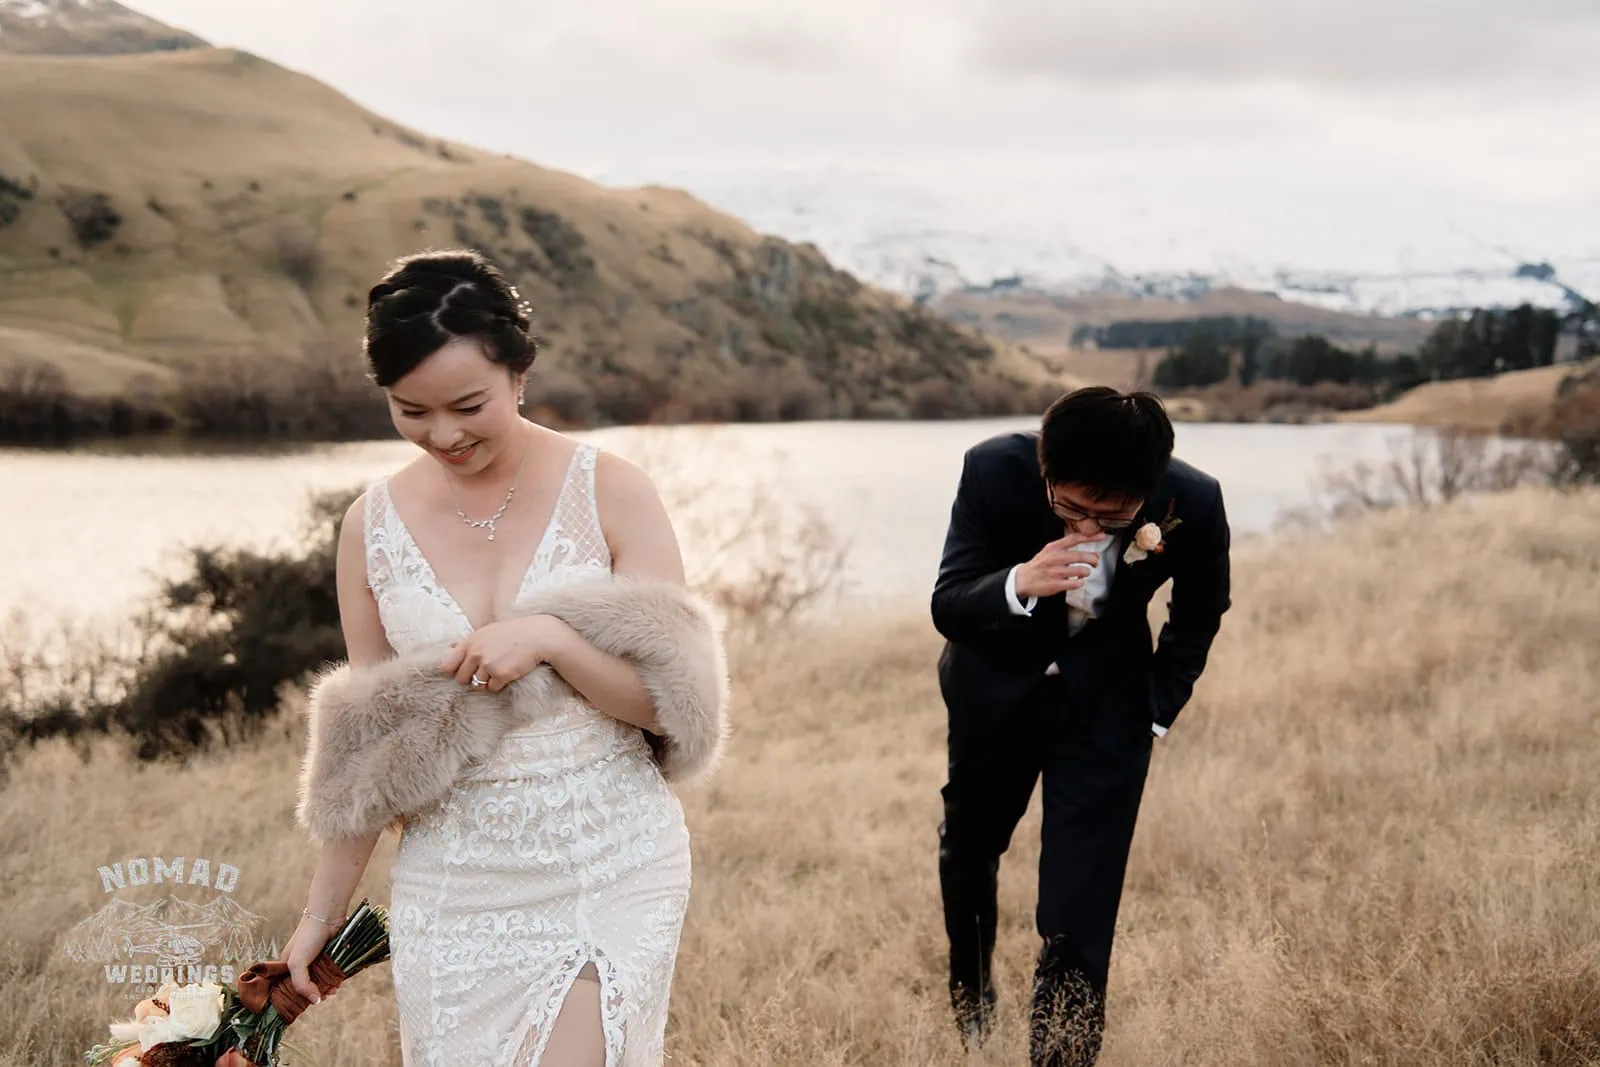 Joanna and Tony's pre-wedding shoot in Queenstown, New Zealand, captures them standing in a field near a lake.